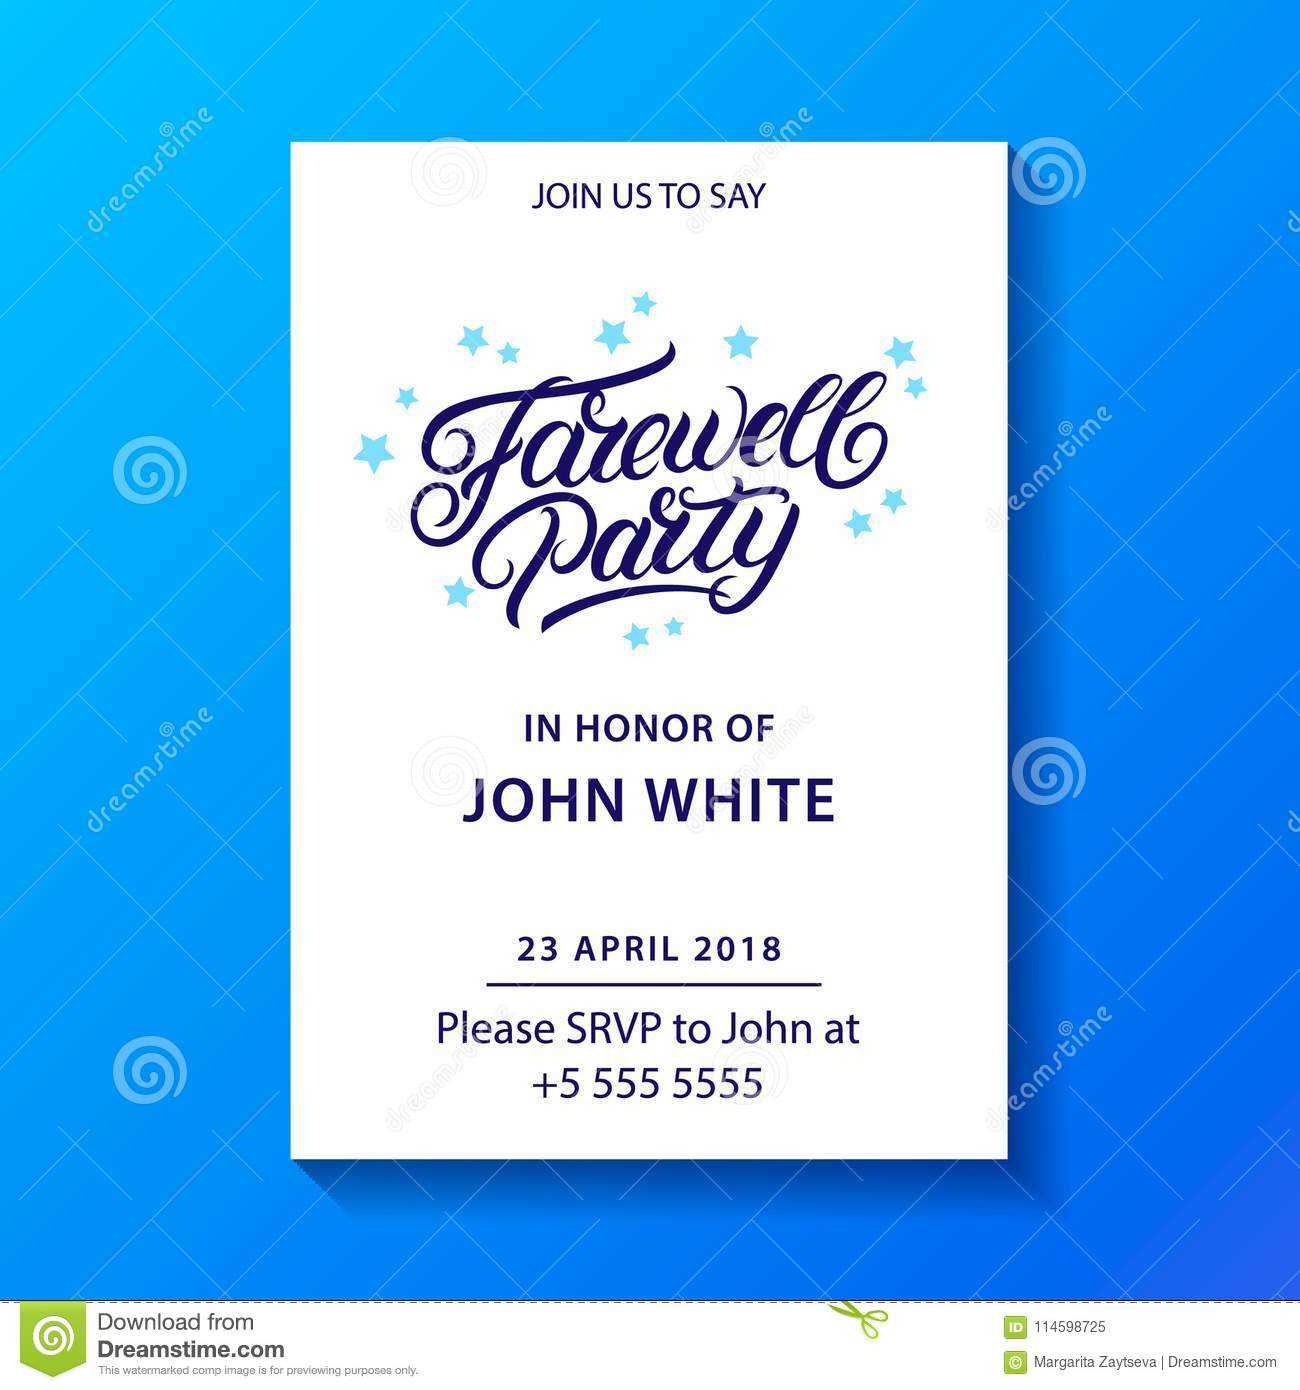 Farewell Party Hand Written Lettering. Stock Vector Throughout Farewell Invitation Card Template